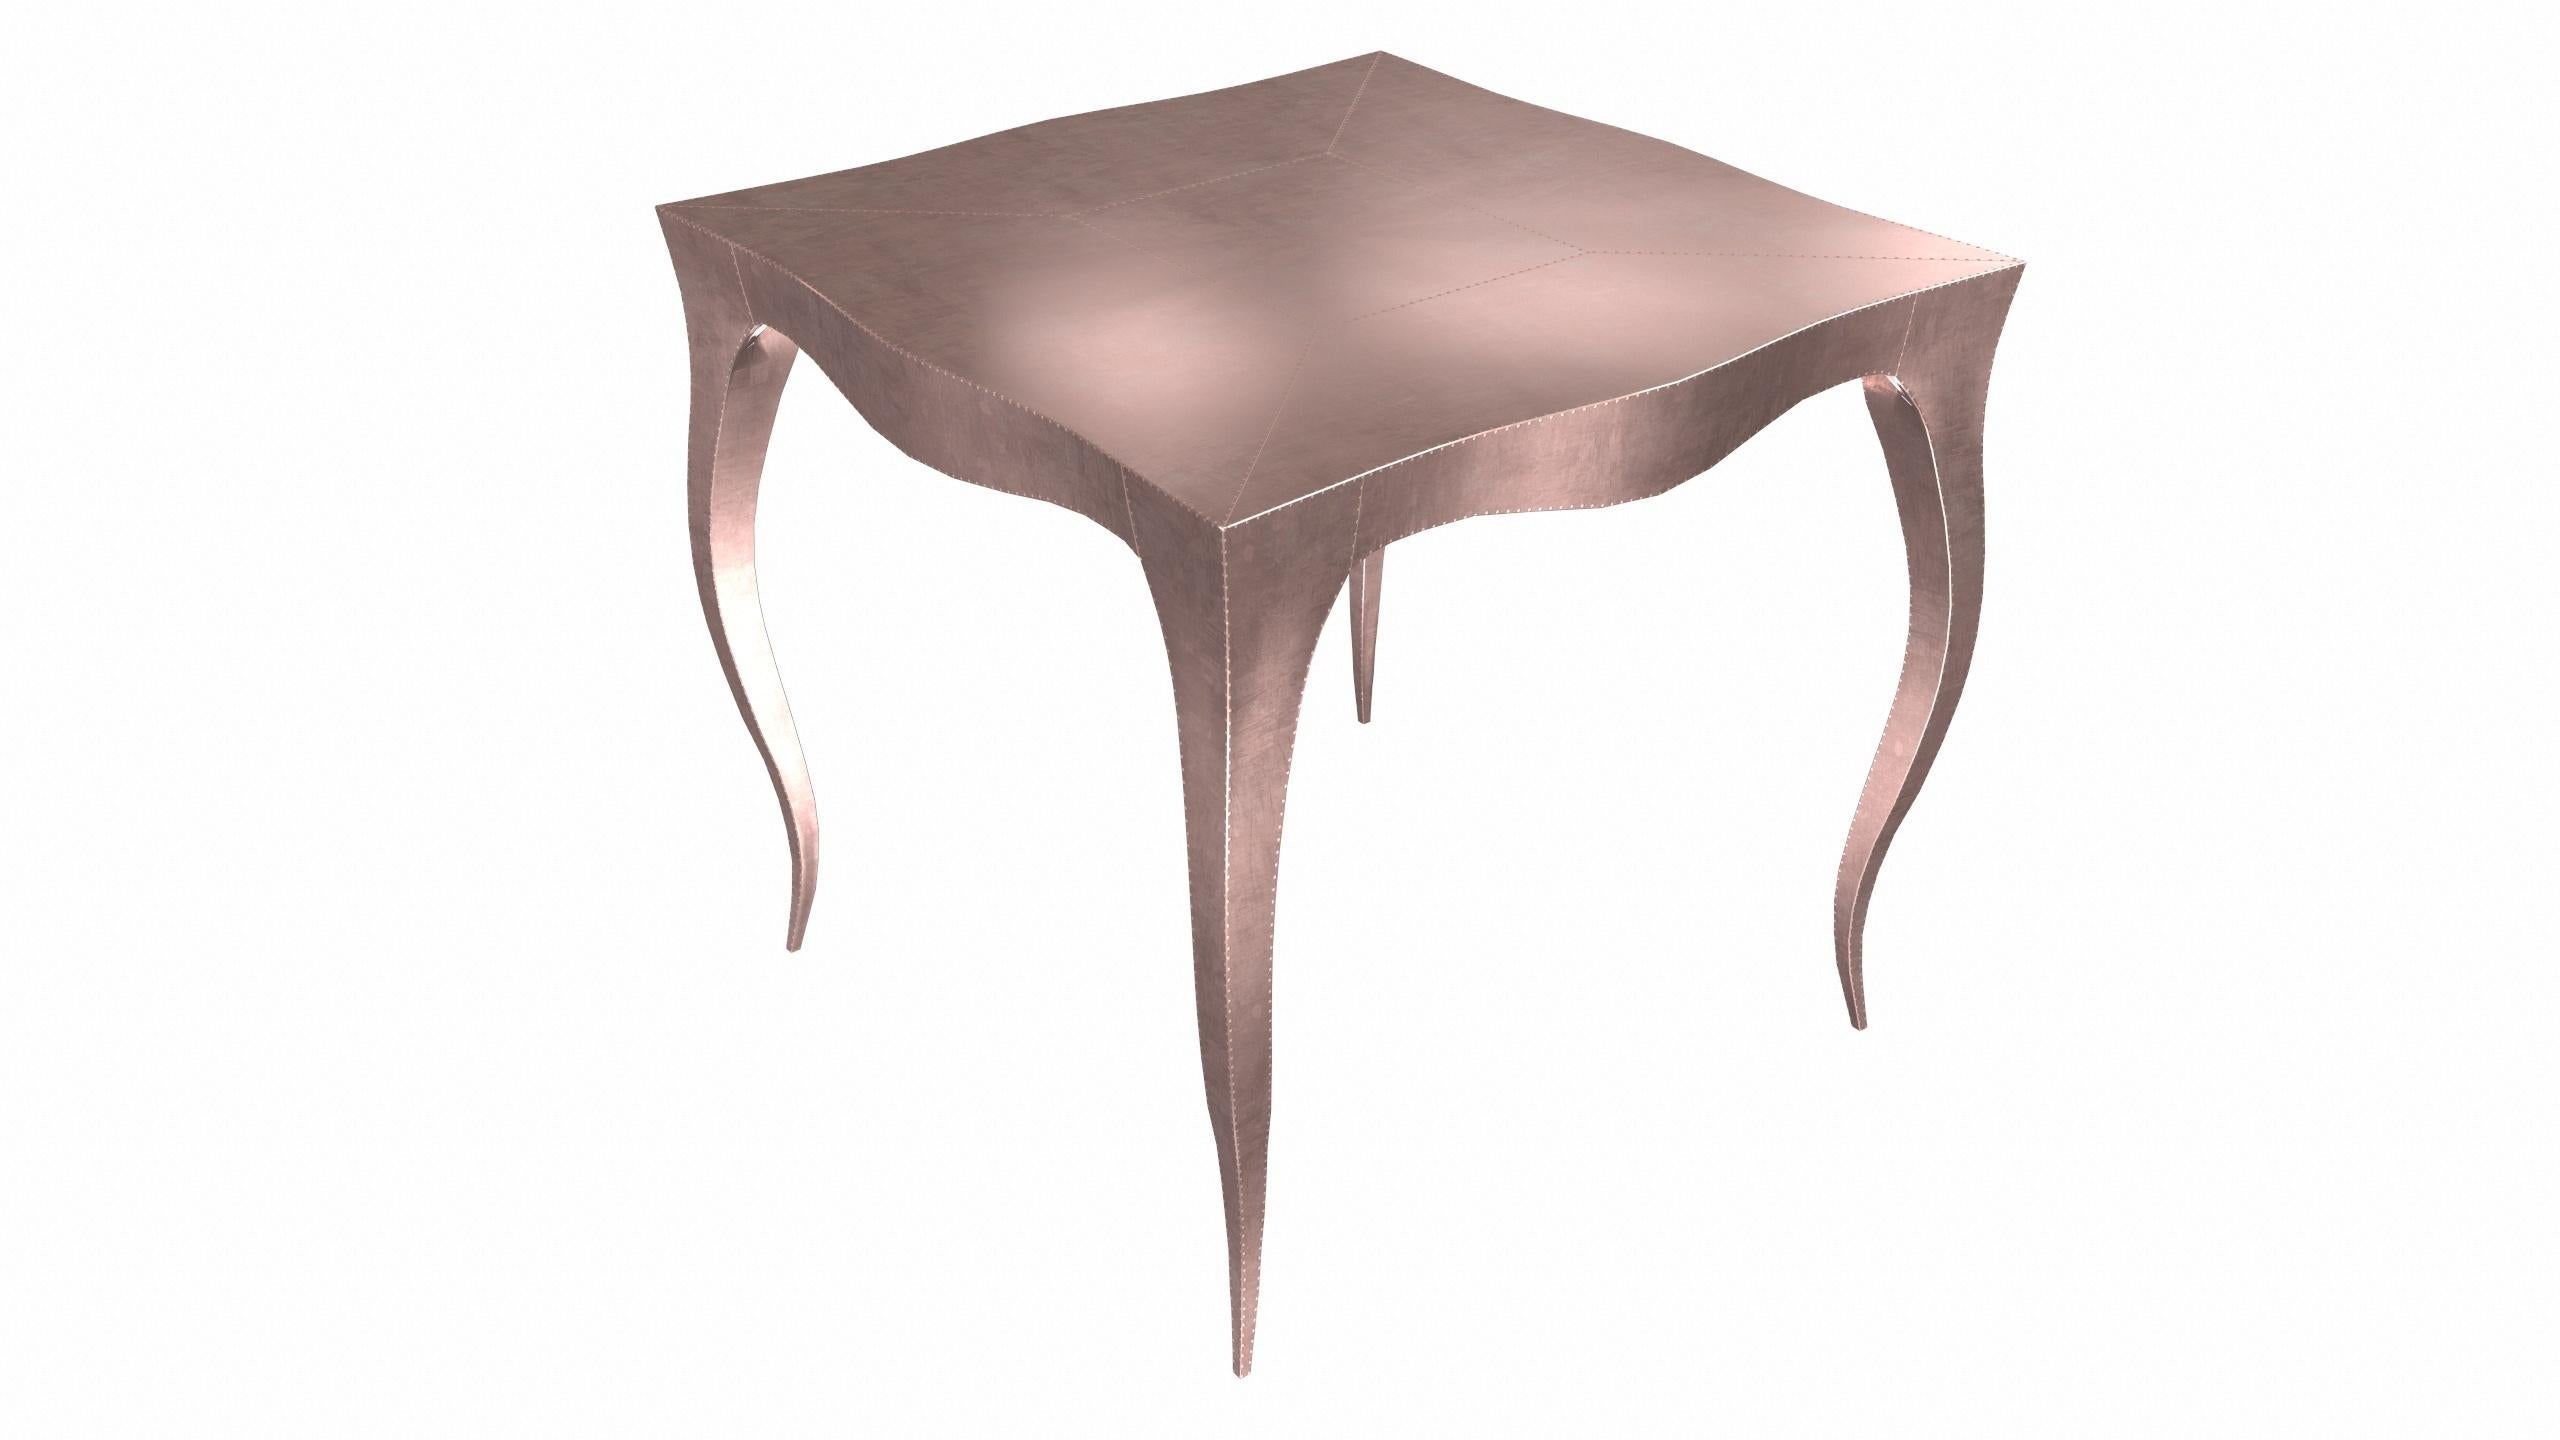 Metal Louise Art Deco Nesting Tables and Stacking Tables Smooth Copper by Paul Mathieu For Sale